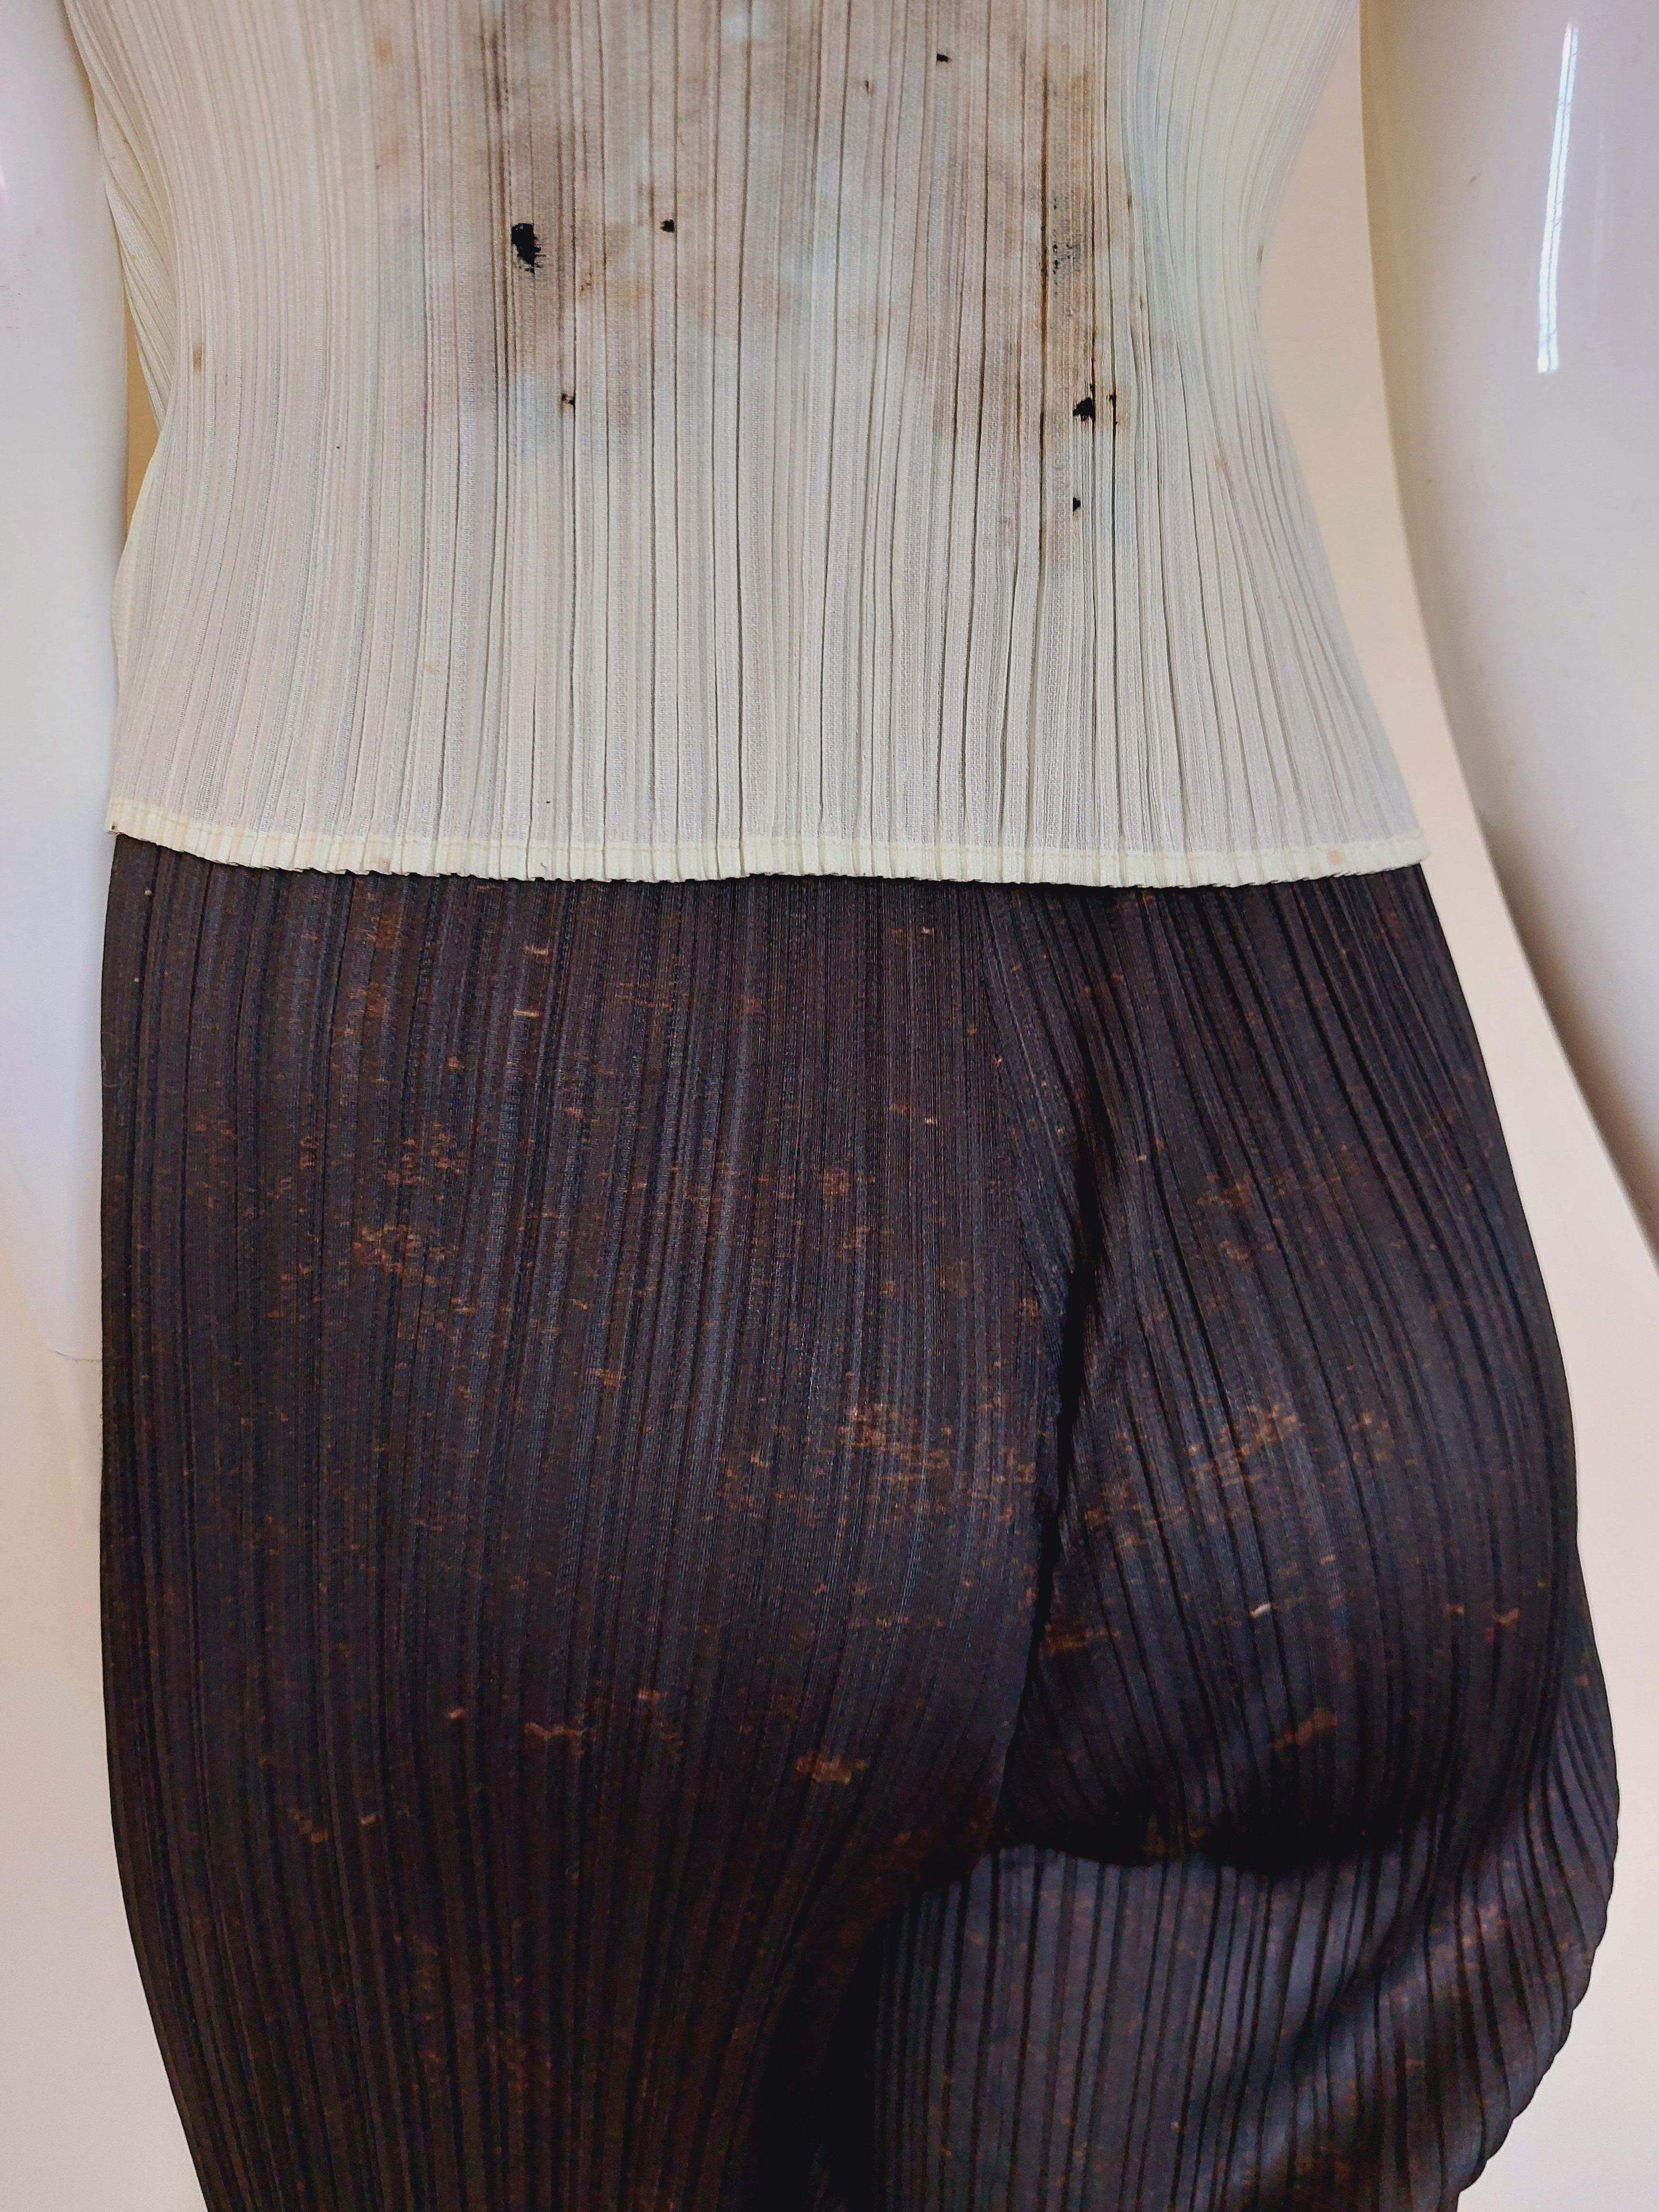 Pleats Please Issey Miyake Guest Artist Series No. 4 Cai Guo-Qiang Bullet Pants  For Sale 4